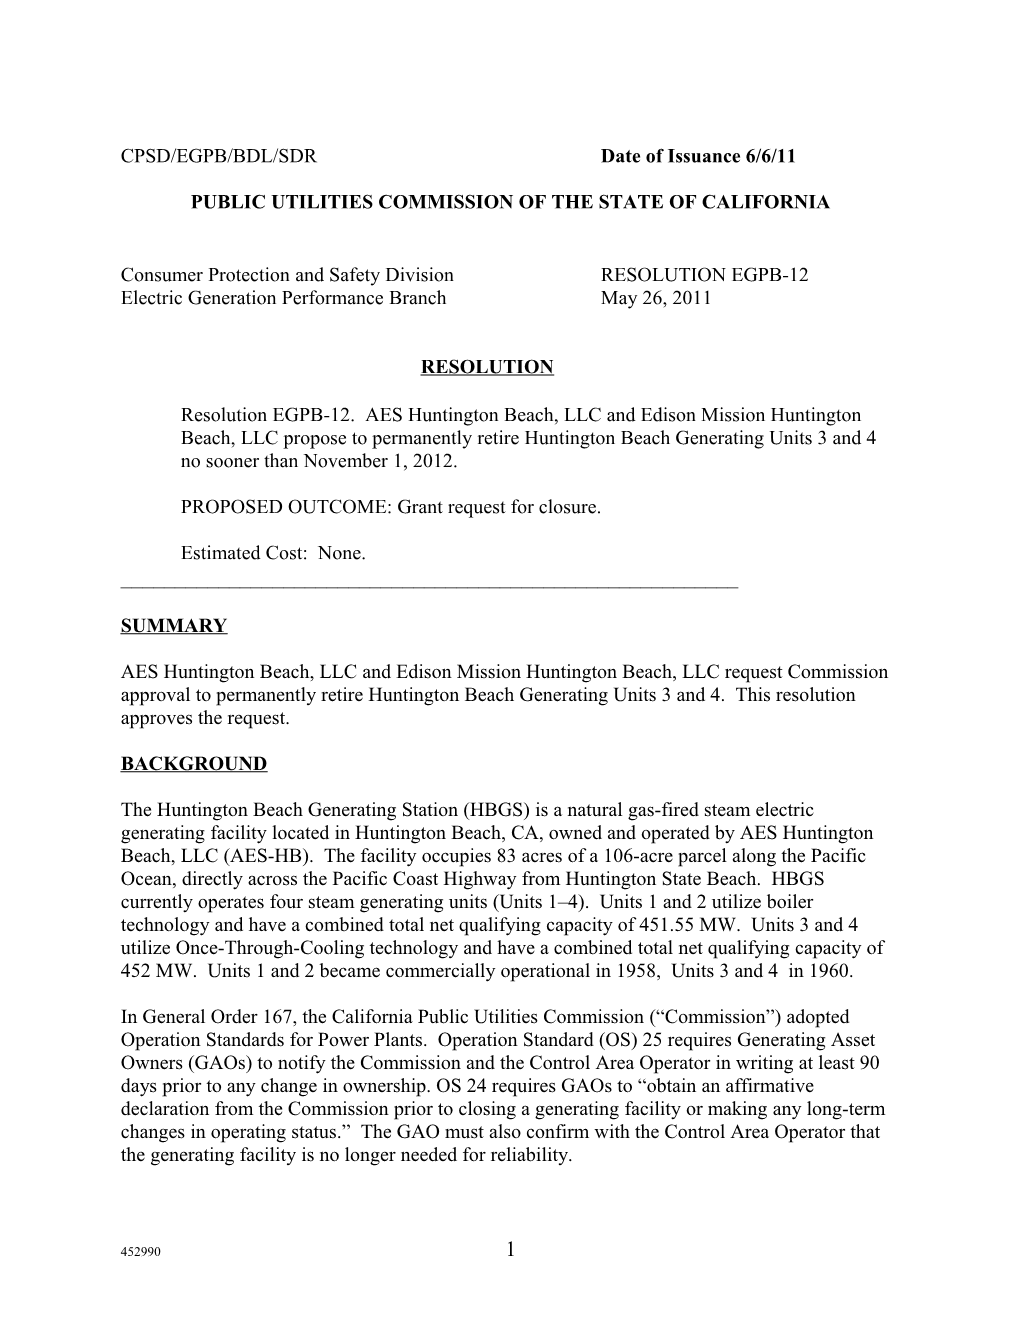 Public Utilities Commission of the State of California s76